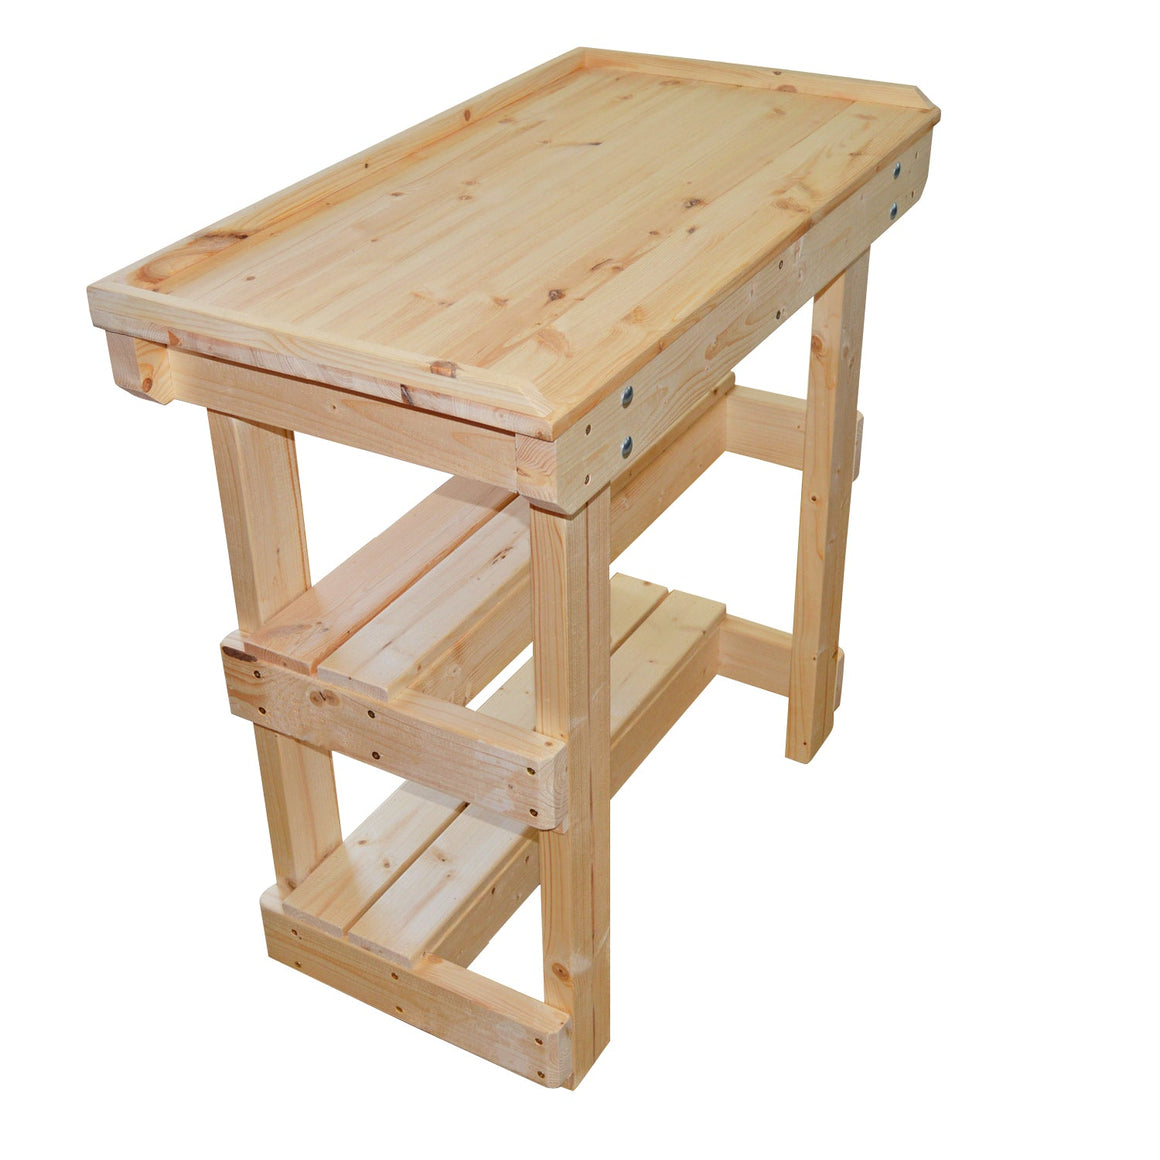 Sit down crafting workbench with worktop lip